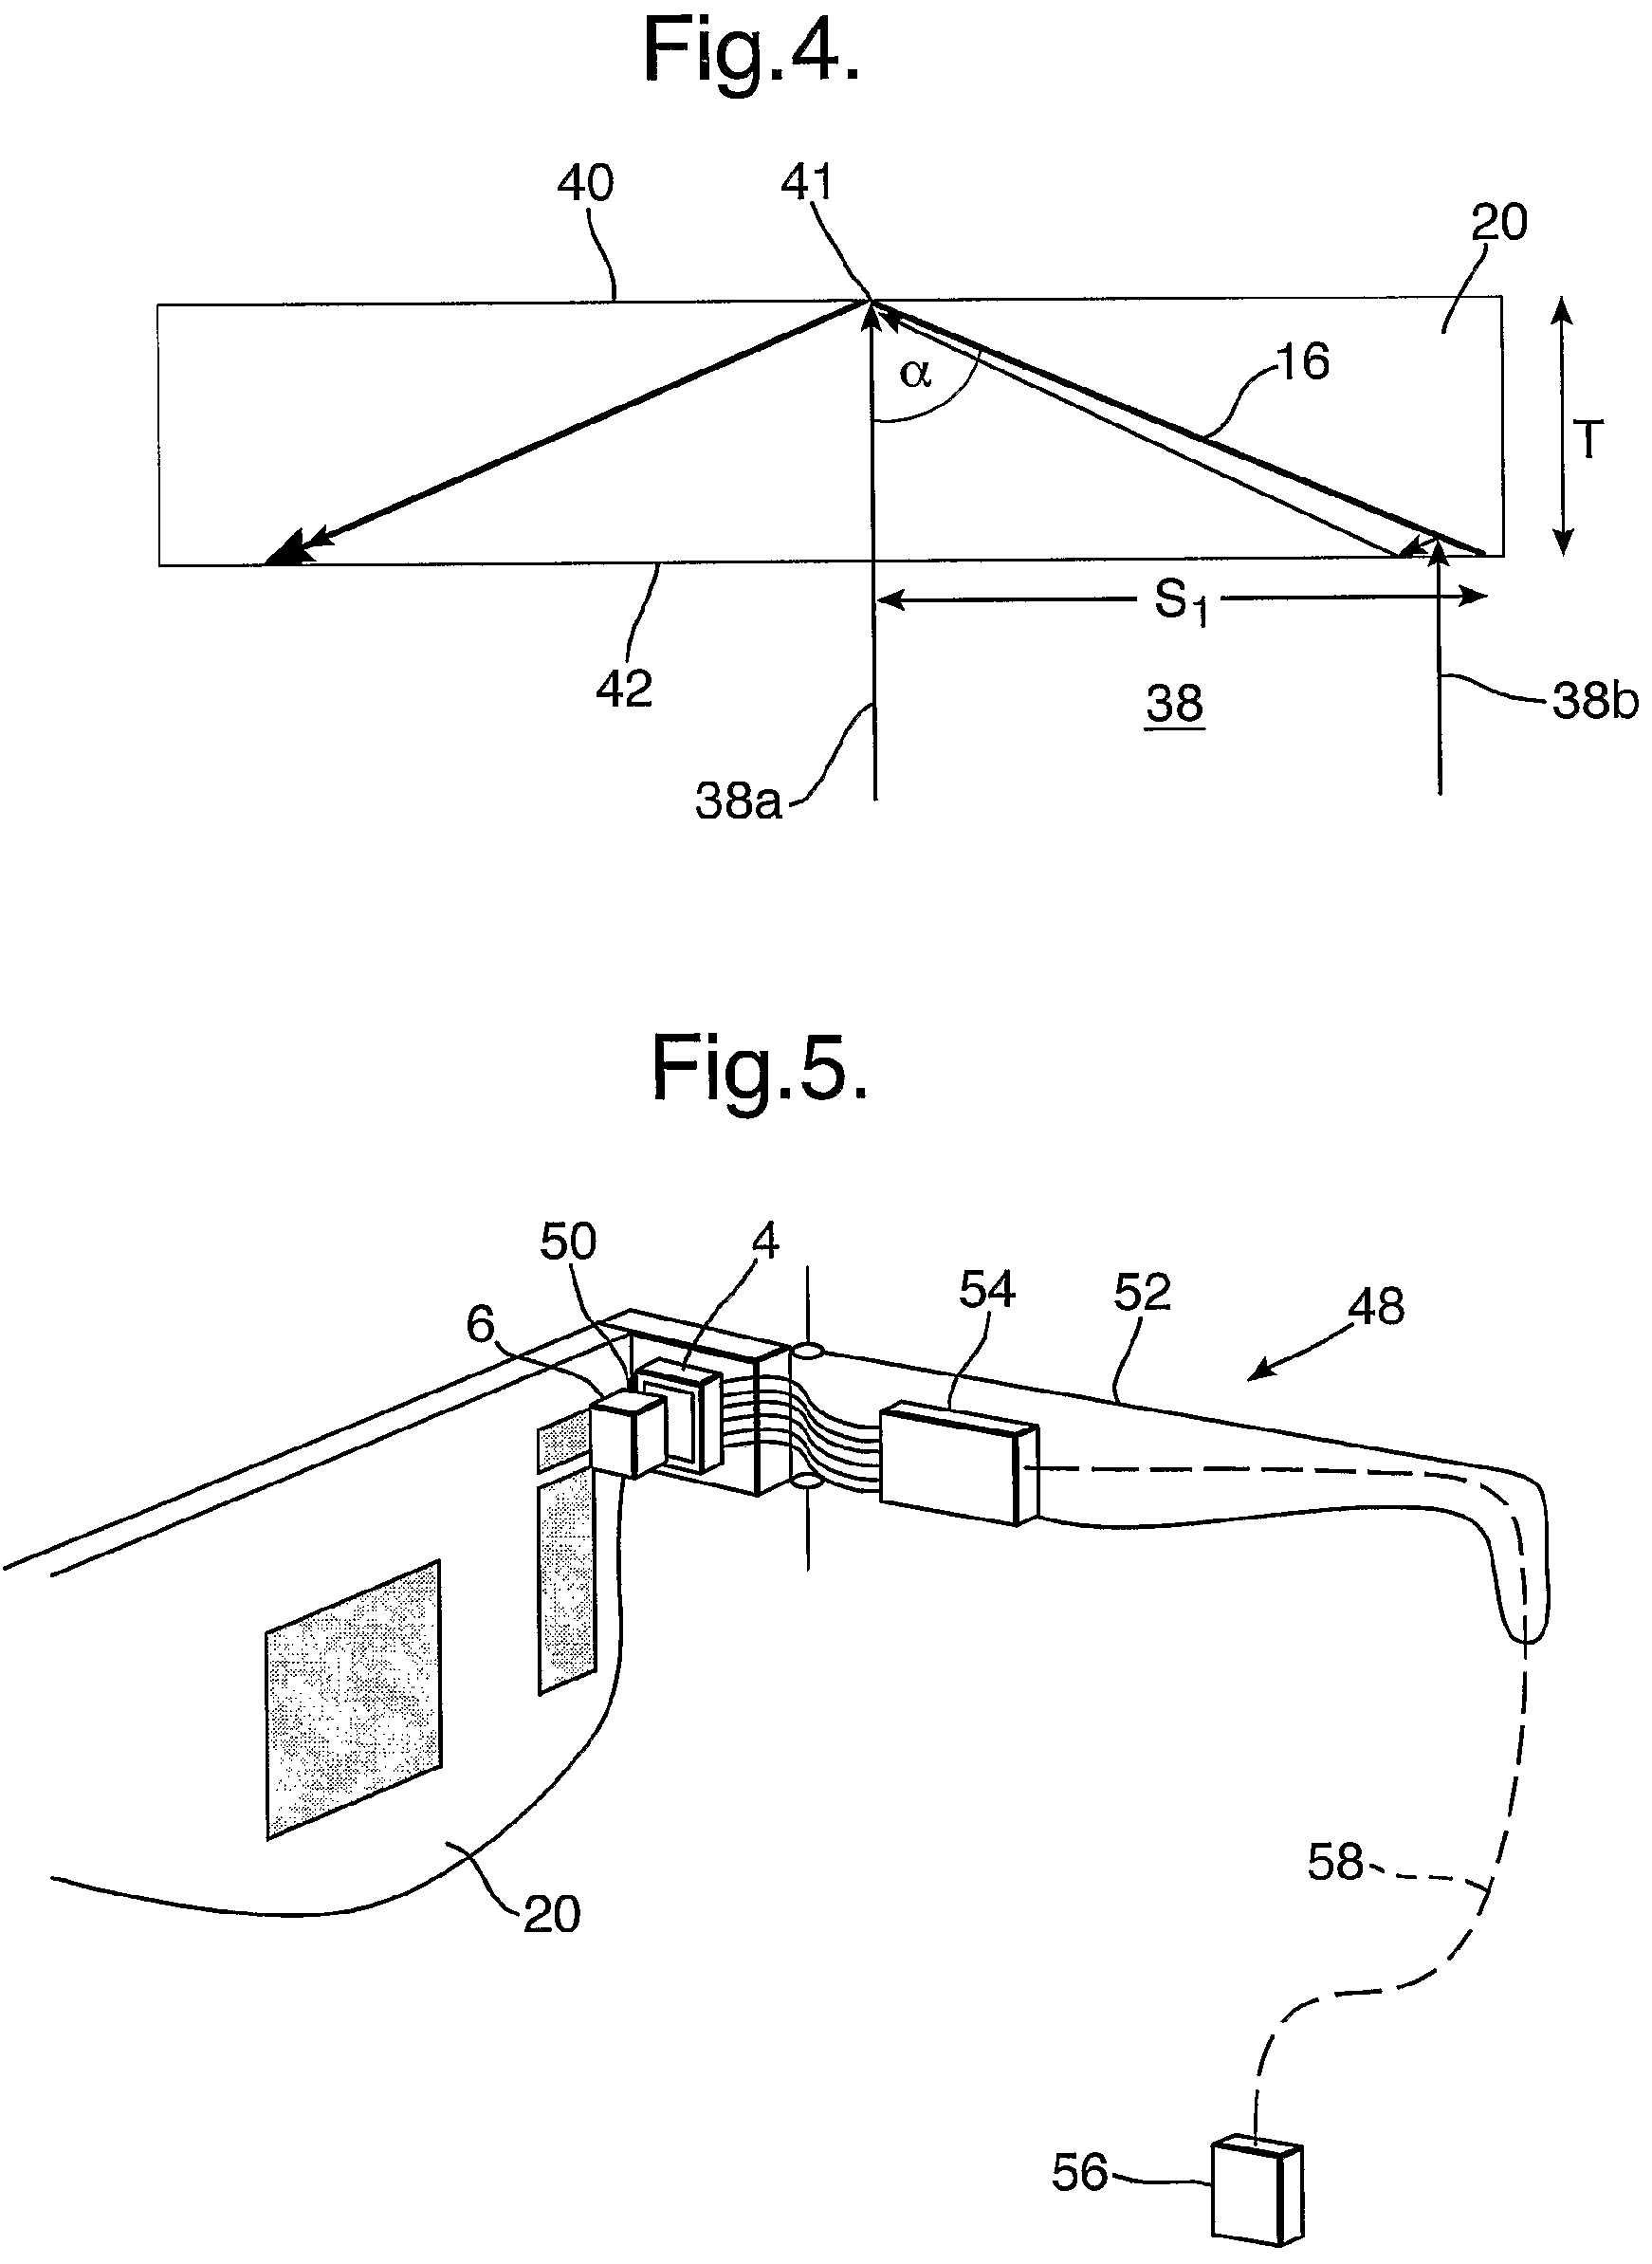 Optical device for light coupling